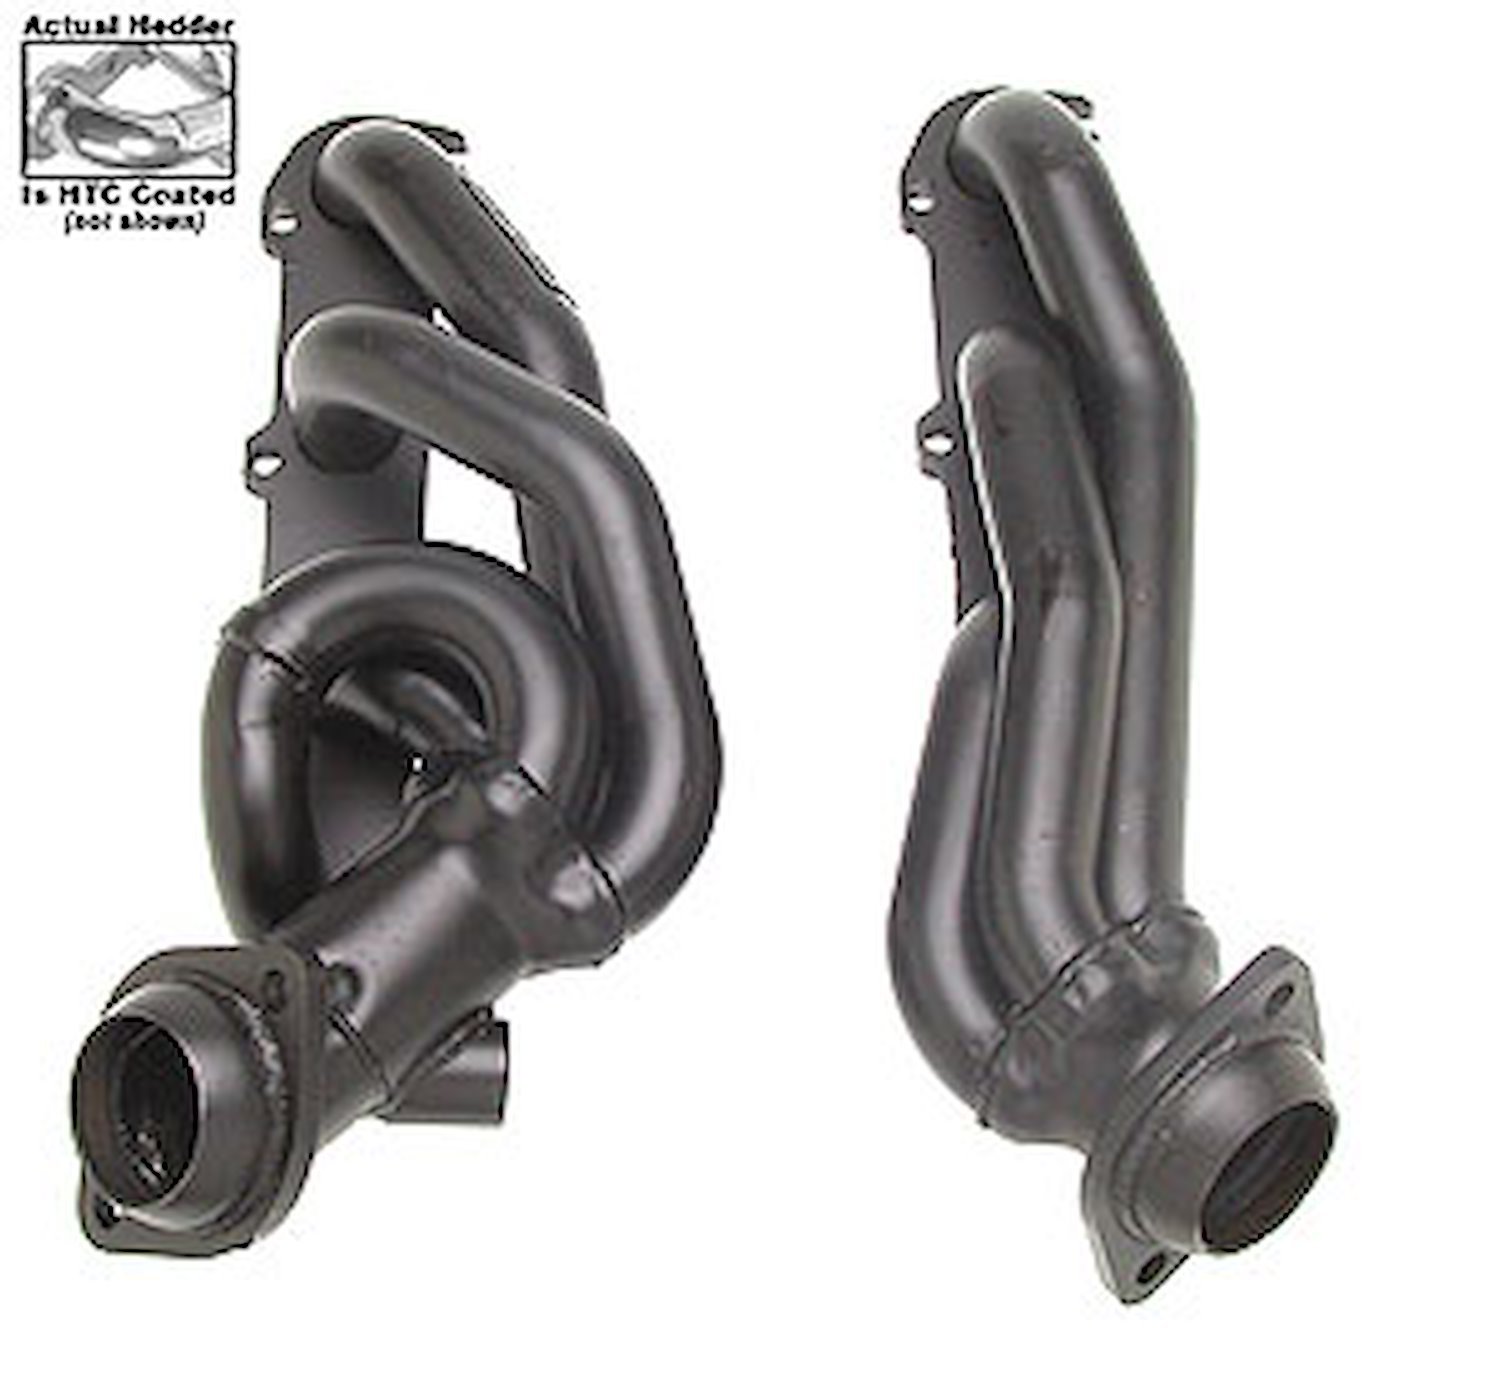 Standard Duty HTC Coated Shorty Headers 1997-02 Ford Expedition 5.4L